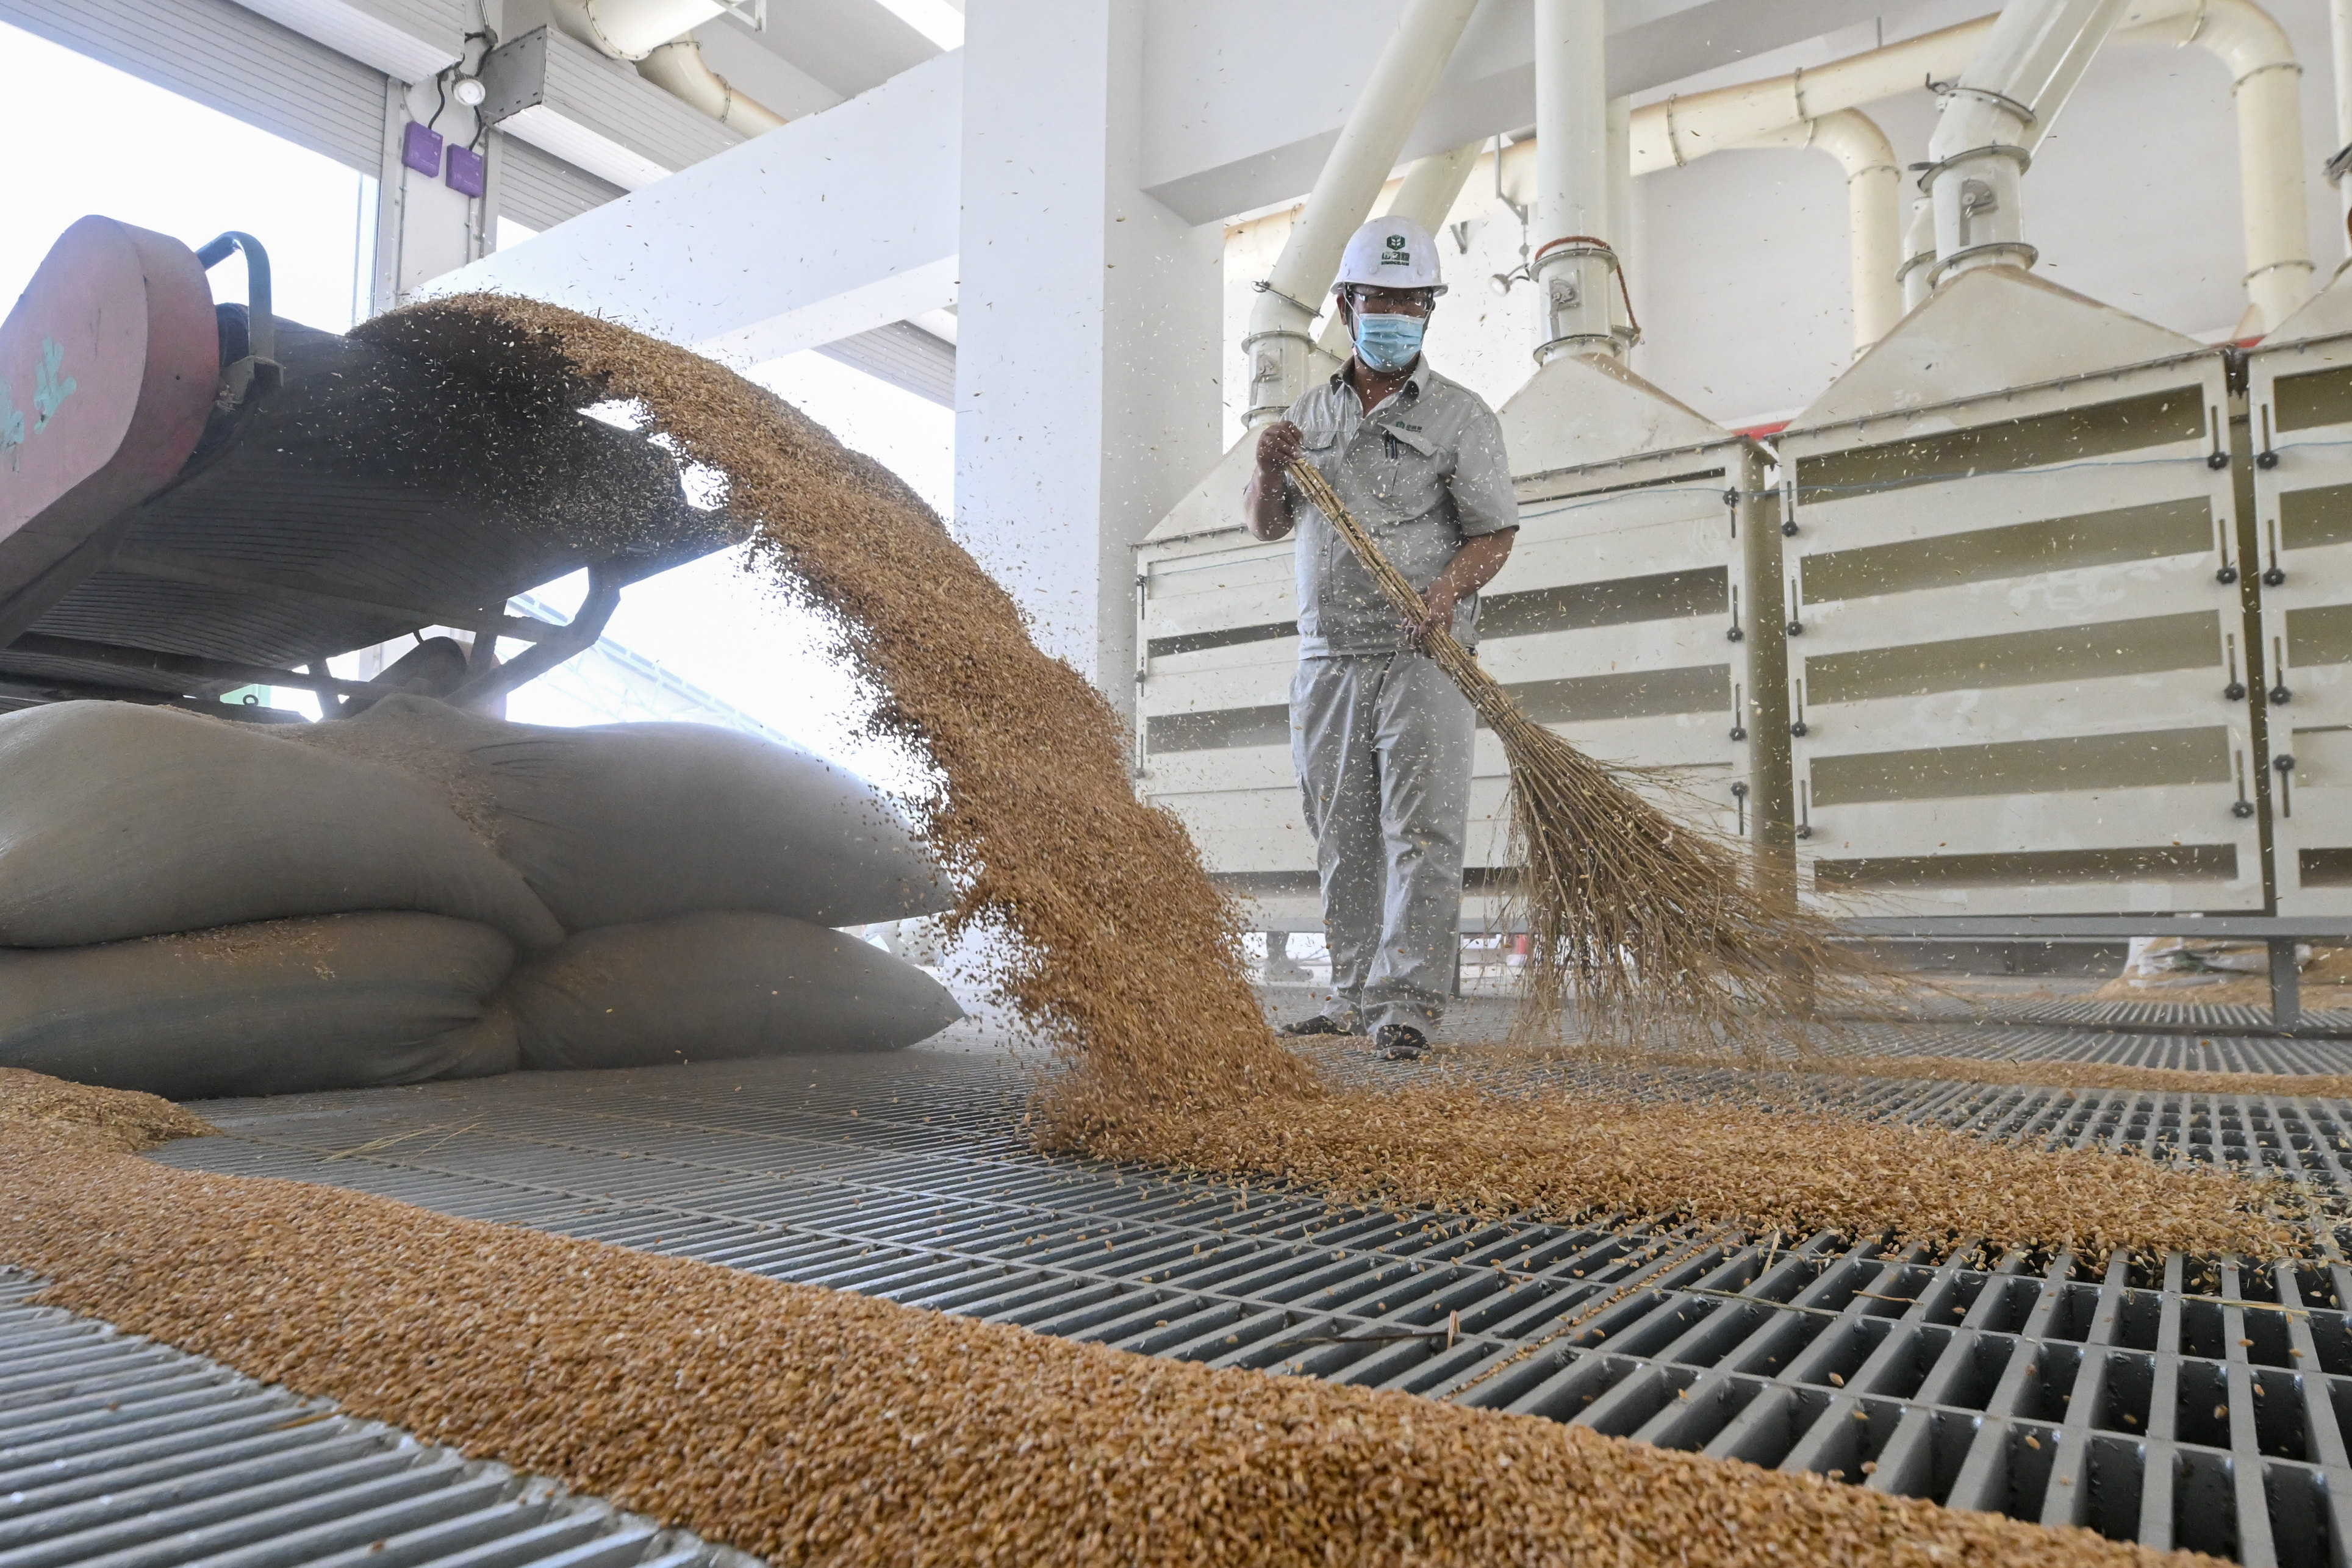 China’s leaders have been ramping up efforts for years to ensure there is enough food to feed the country’s 1.4 billion people. Photo: Xinhua